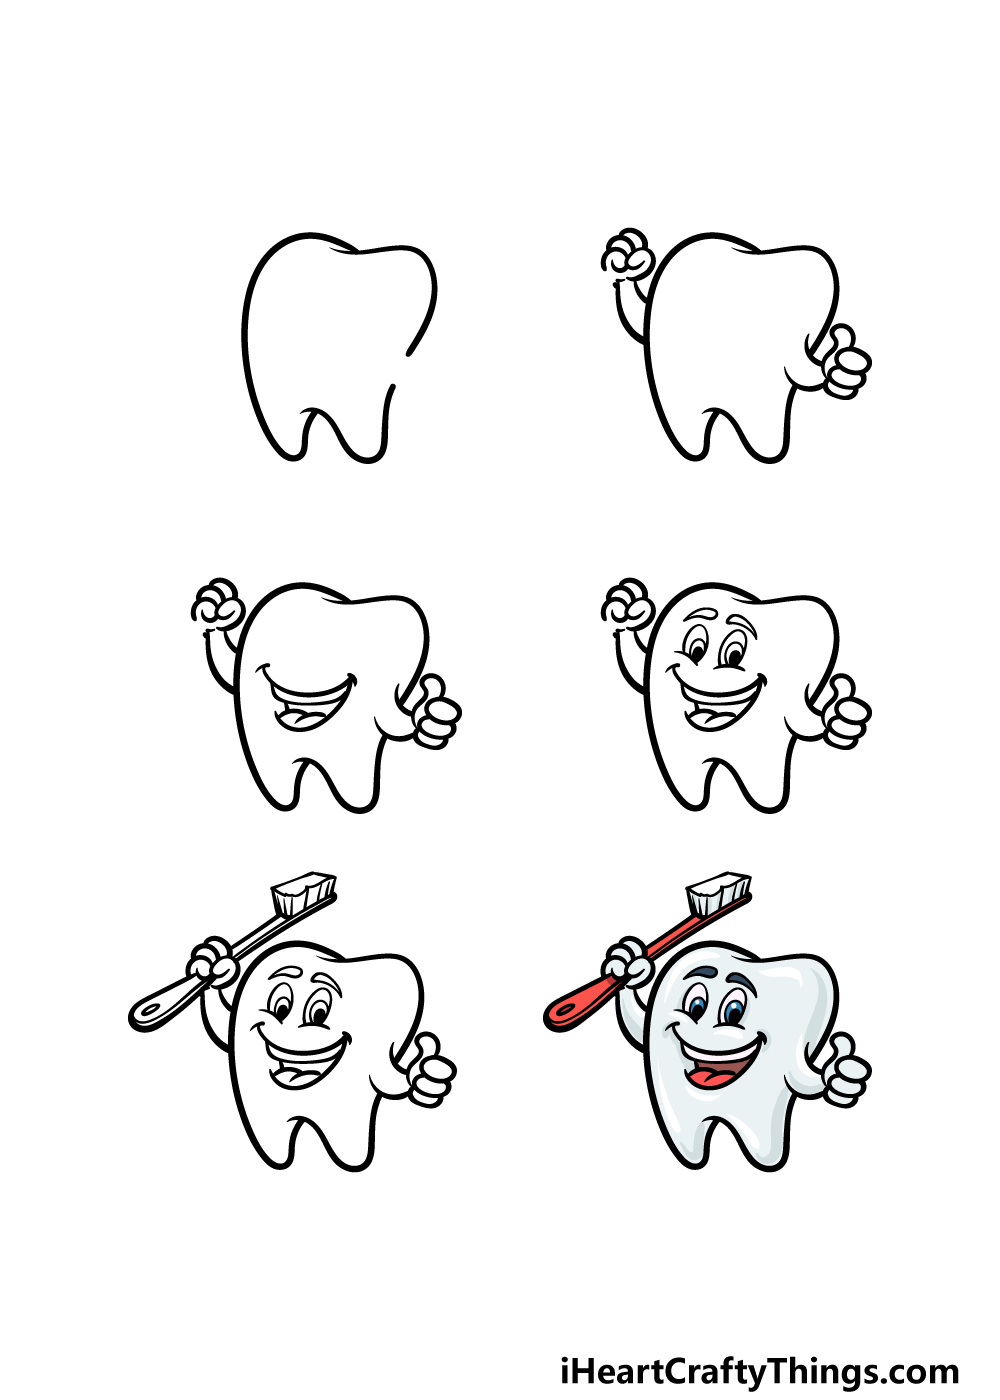 how to draw a cartoon tooth in 6 steps